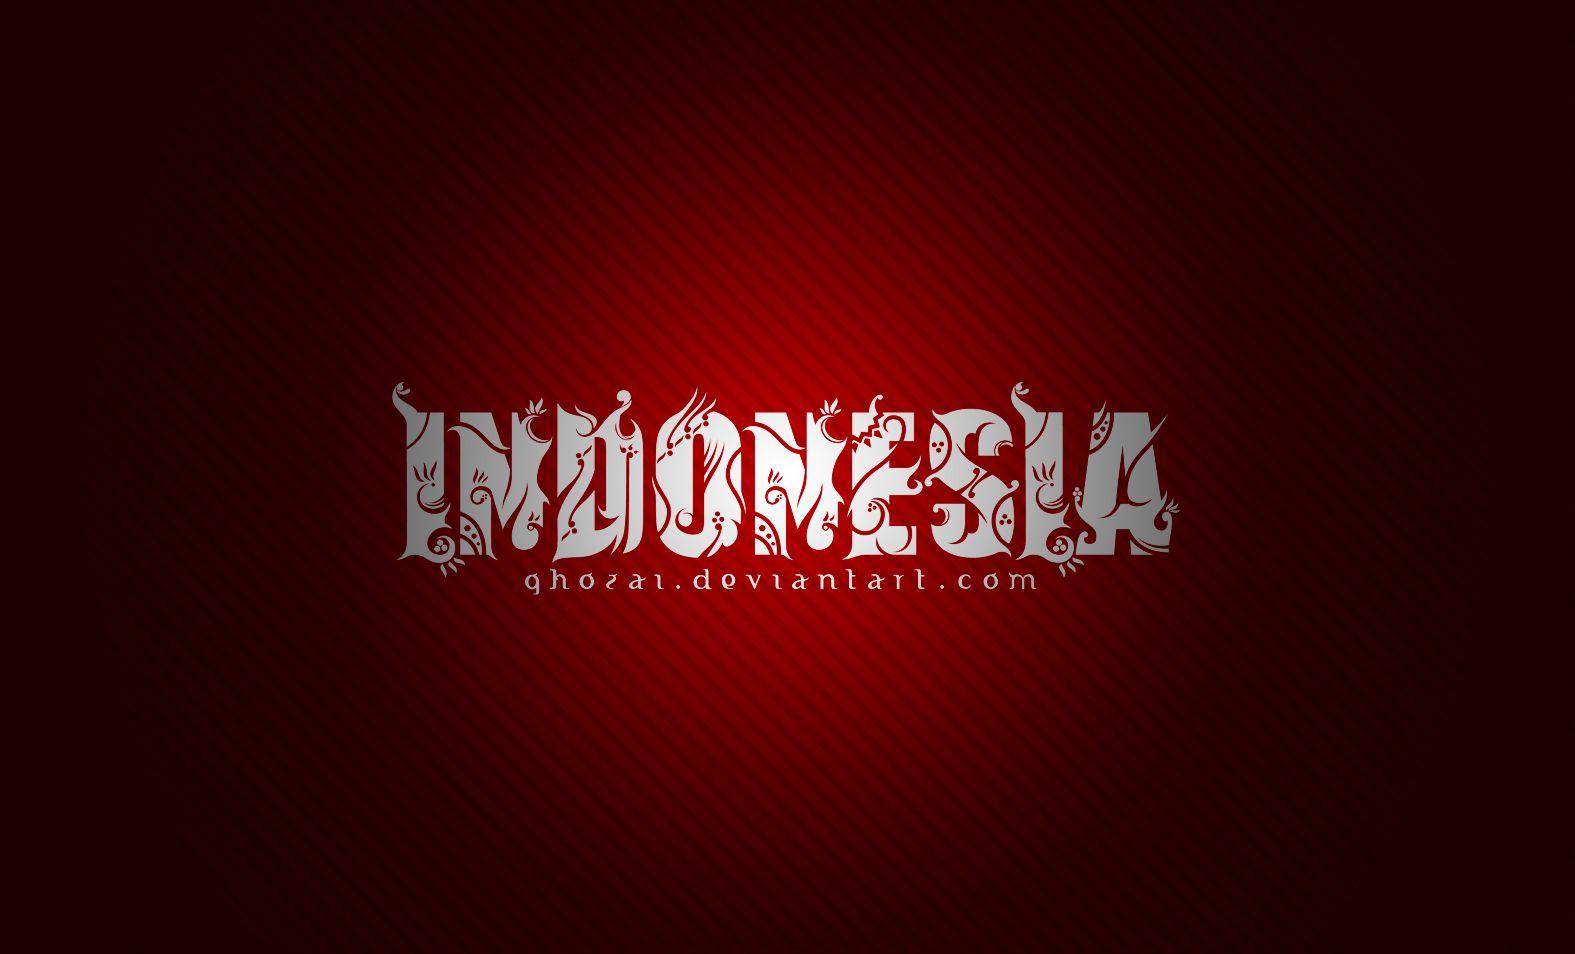 Indonesian Flag Wallpapers Wallpaper Cave